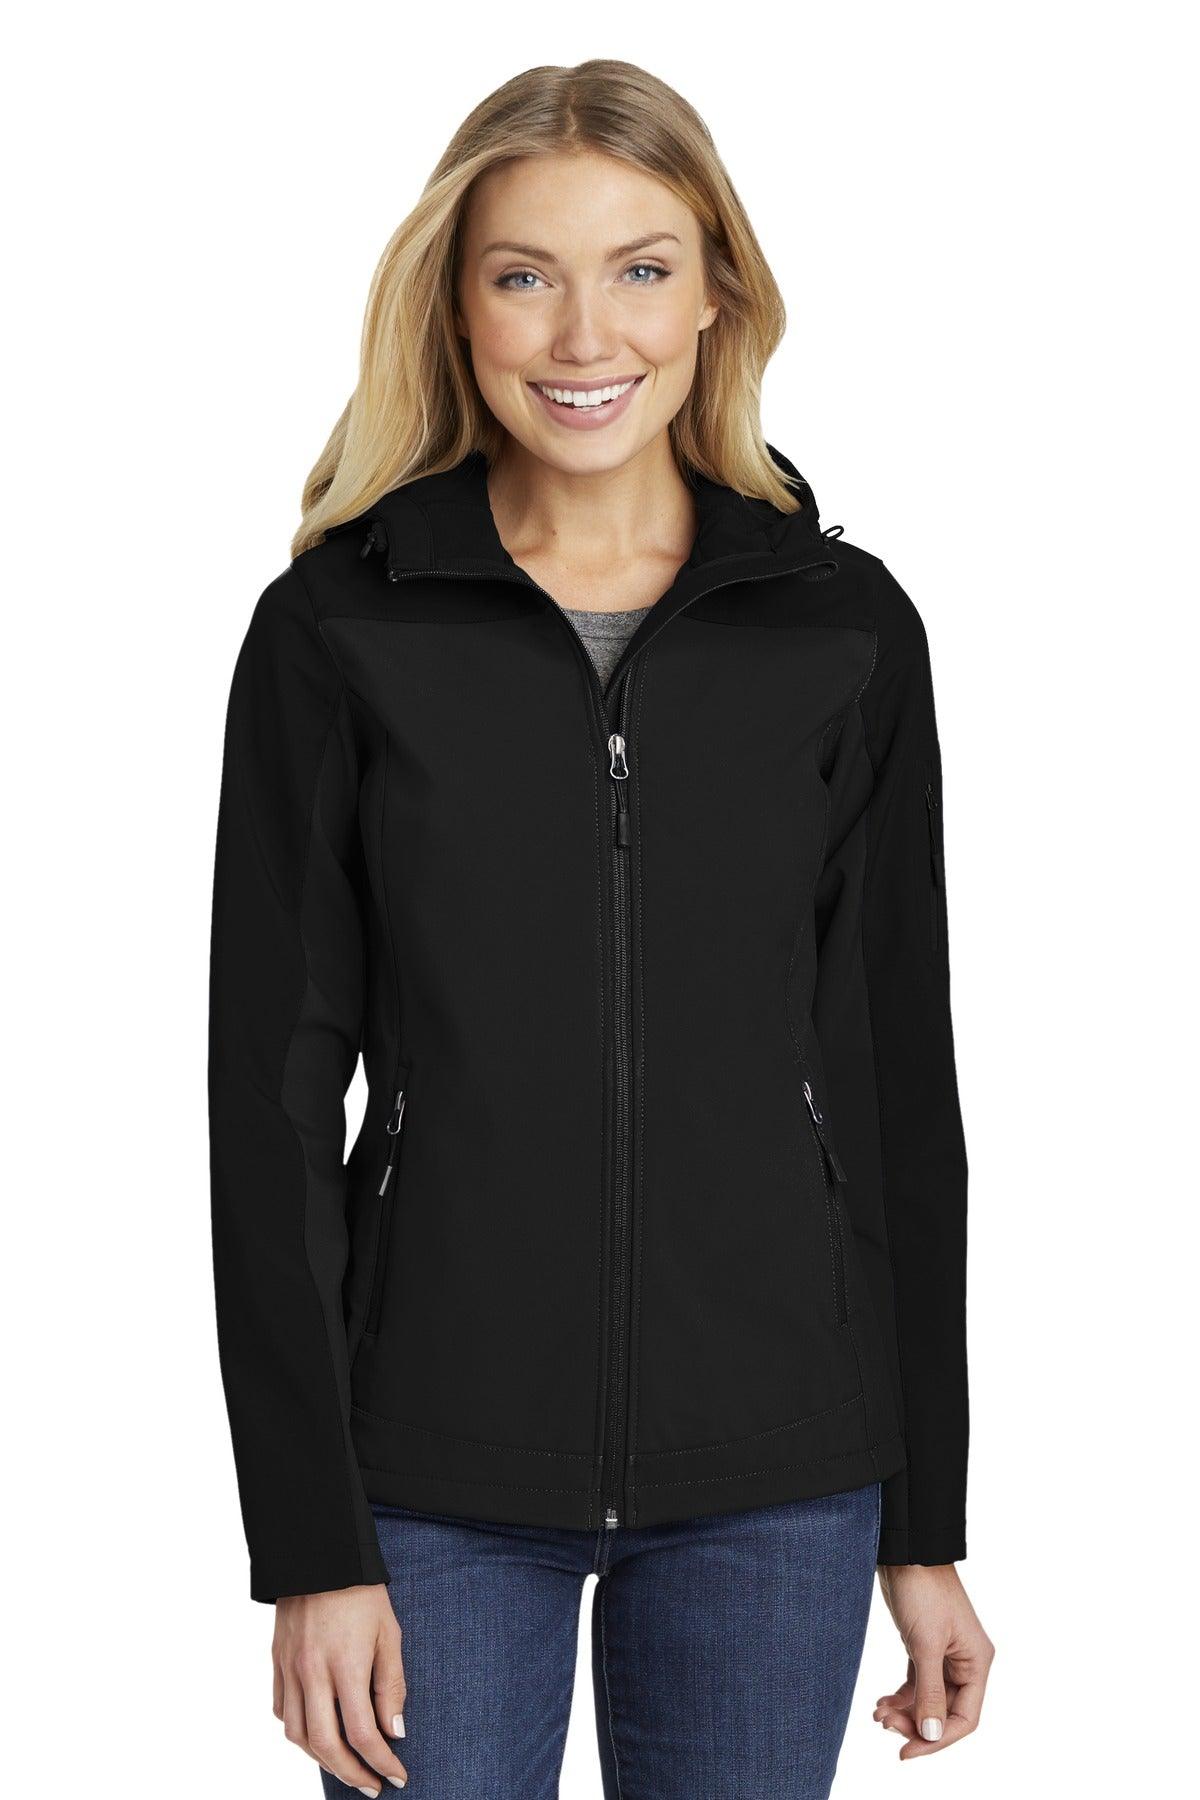 Port Authority Ladies Hooded Core Soft Shell Jacket. L335 - Dresses Max